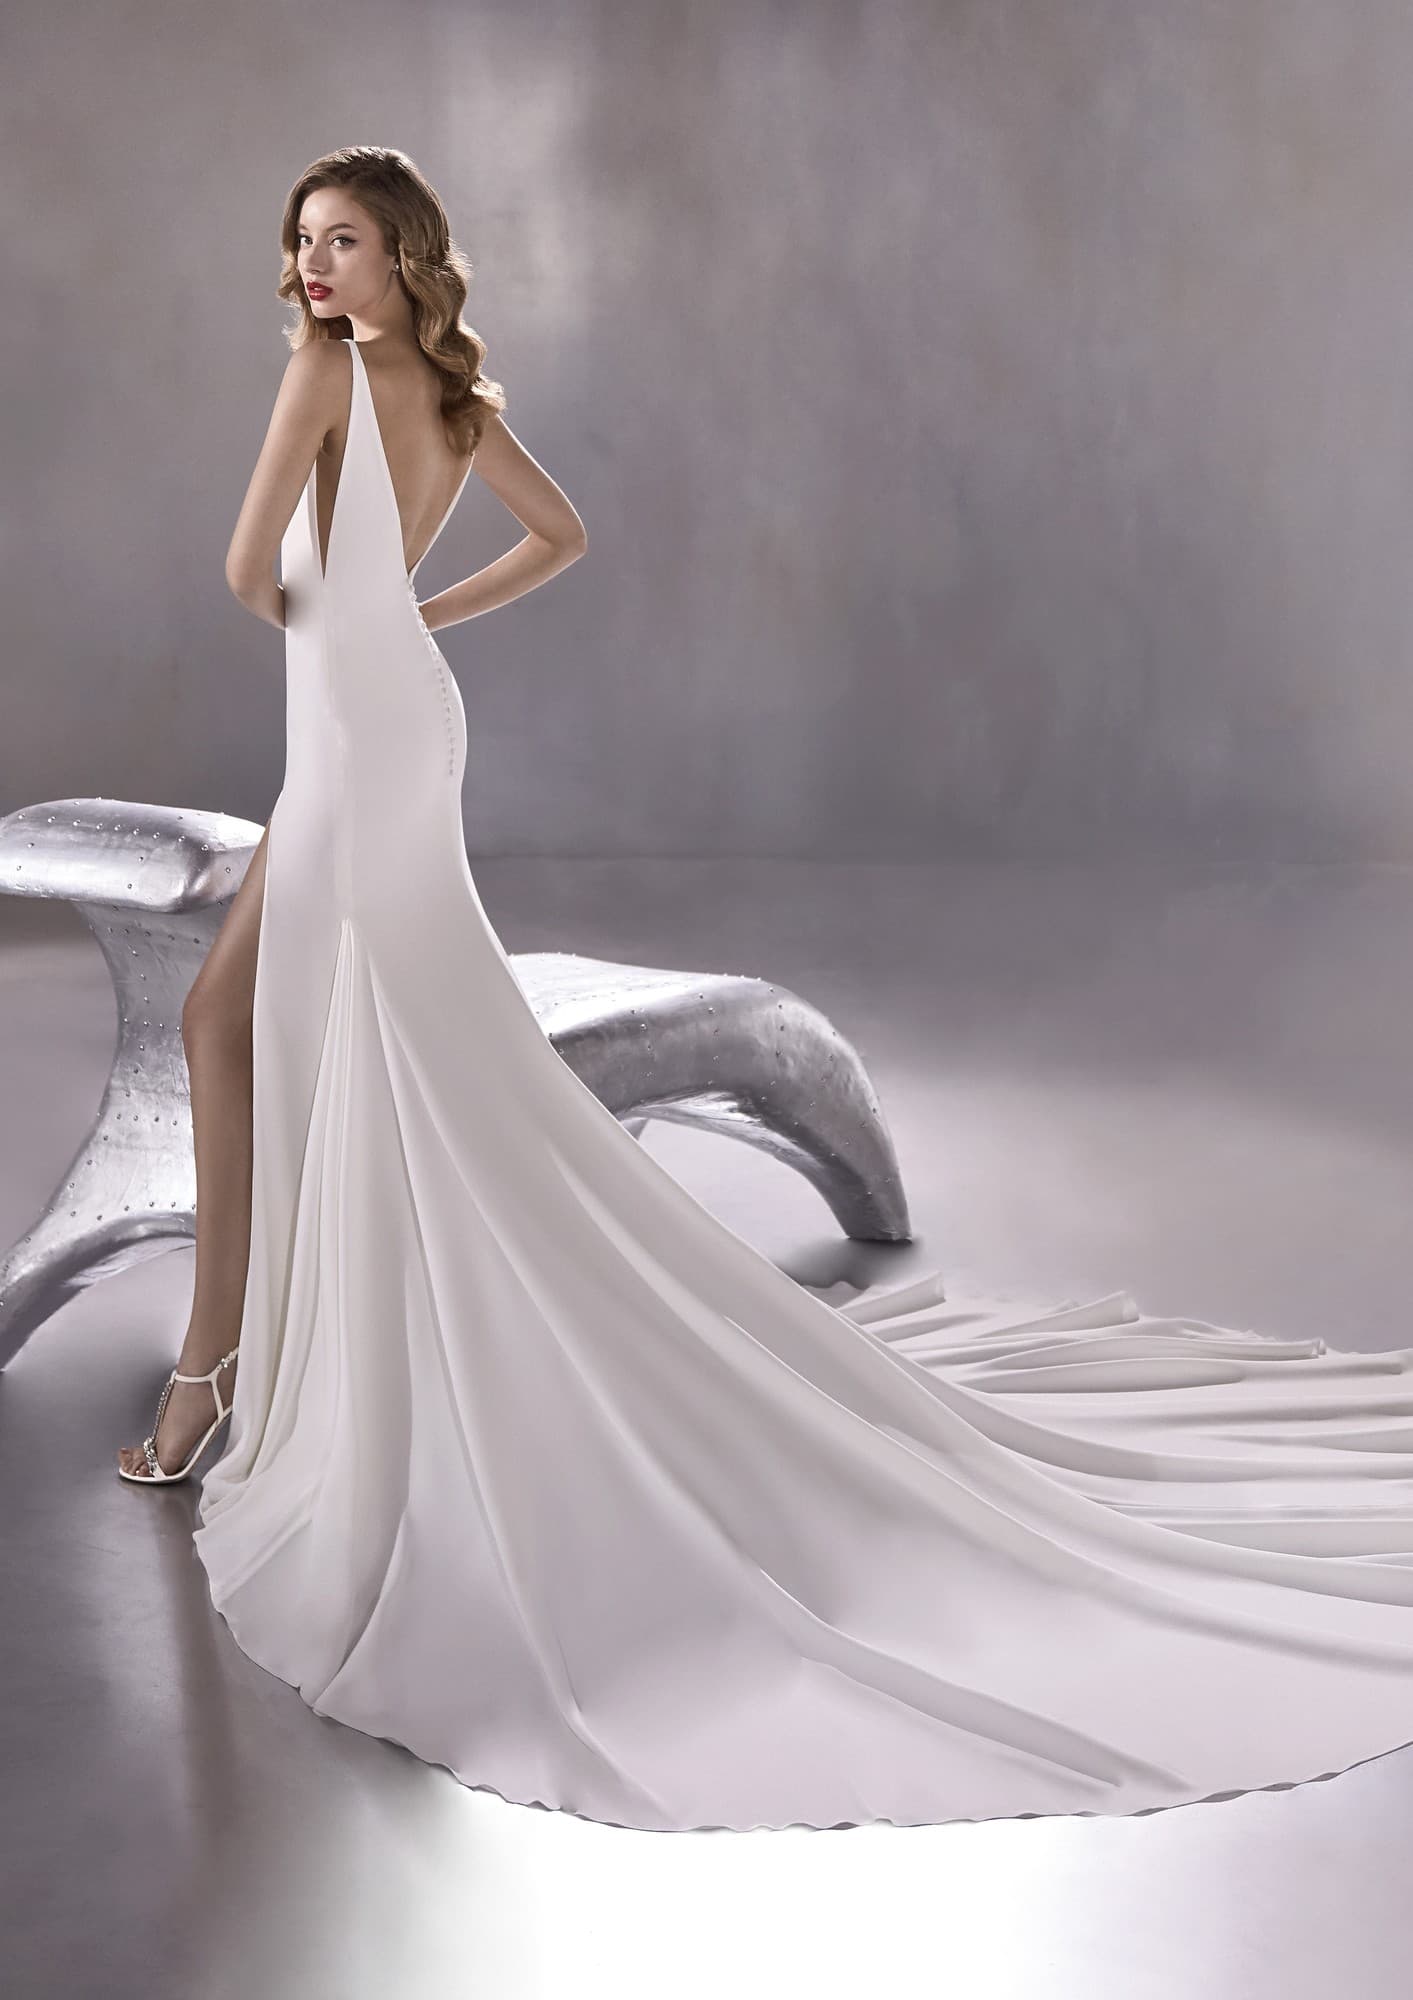  Mermaid Wedding Dress With Straps of the decade The ultimate guide 